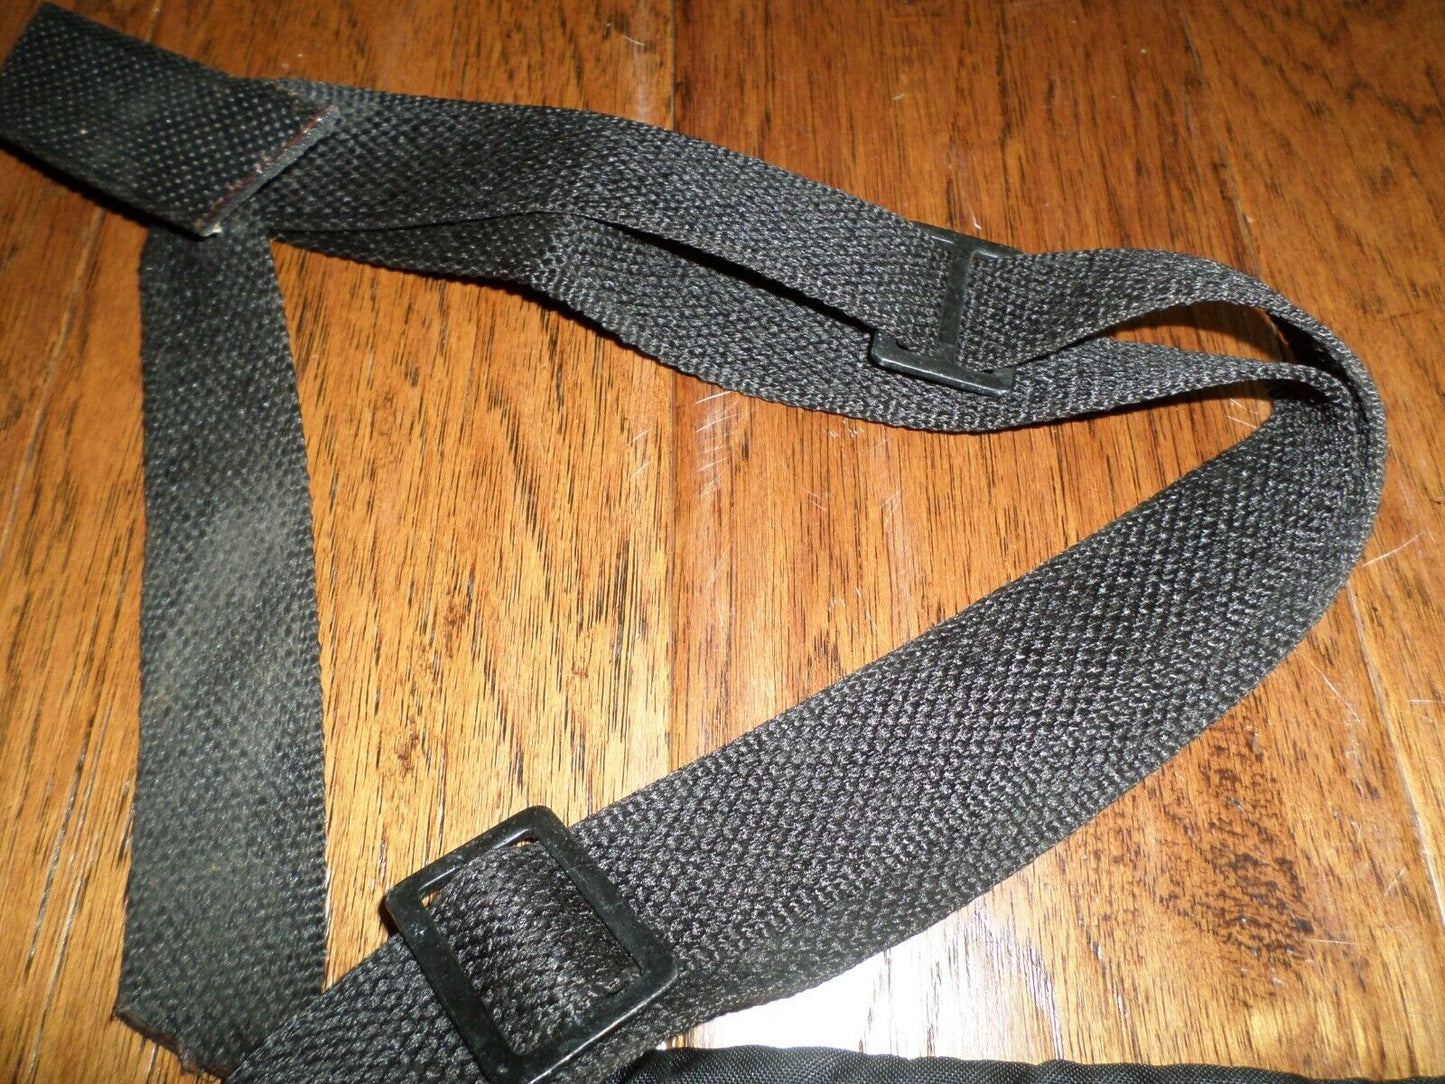 Military heavy duty padded rifle sling new old stock 60" long 2 3/4" wide pad